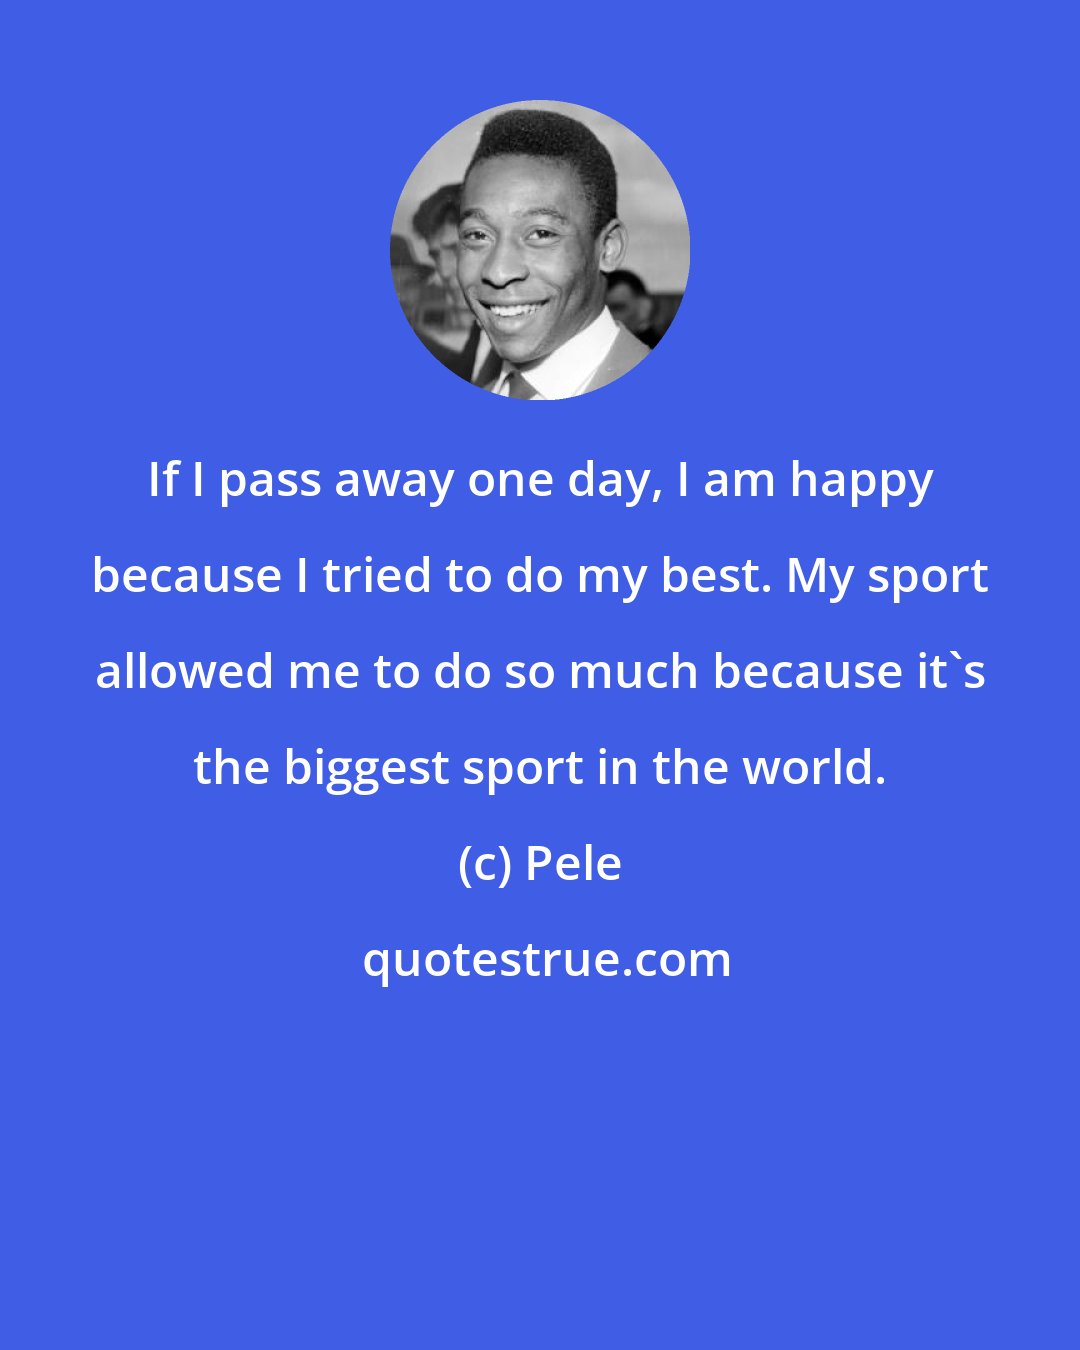 Pele: If I pass away one day, I am happy because I tried to do my best. My sport allowed me to do so much because it's the biggest sport in the world.